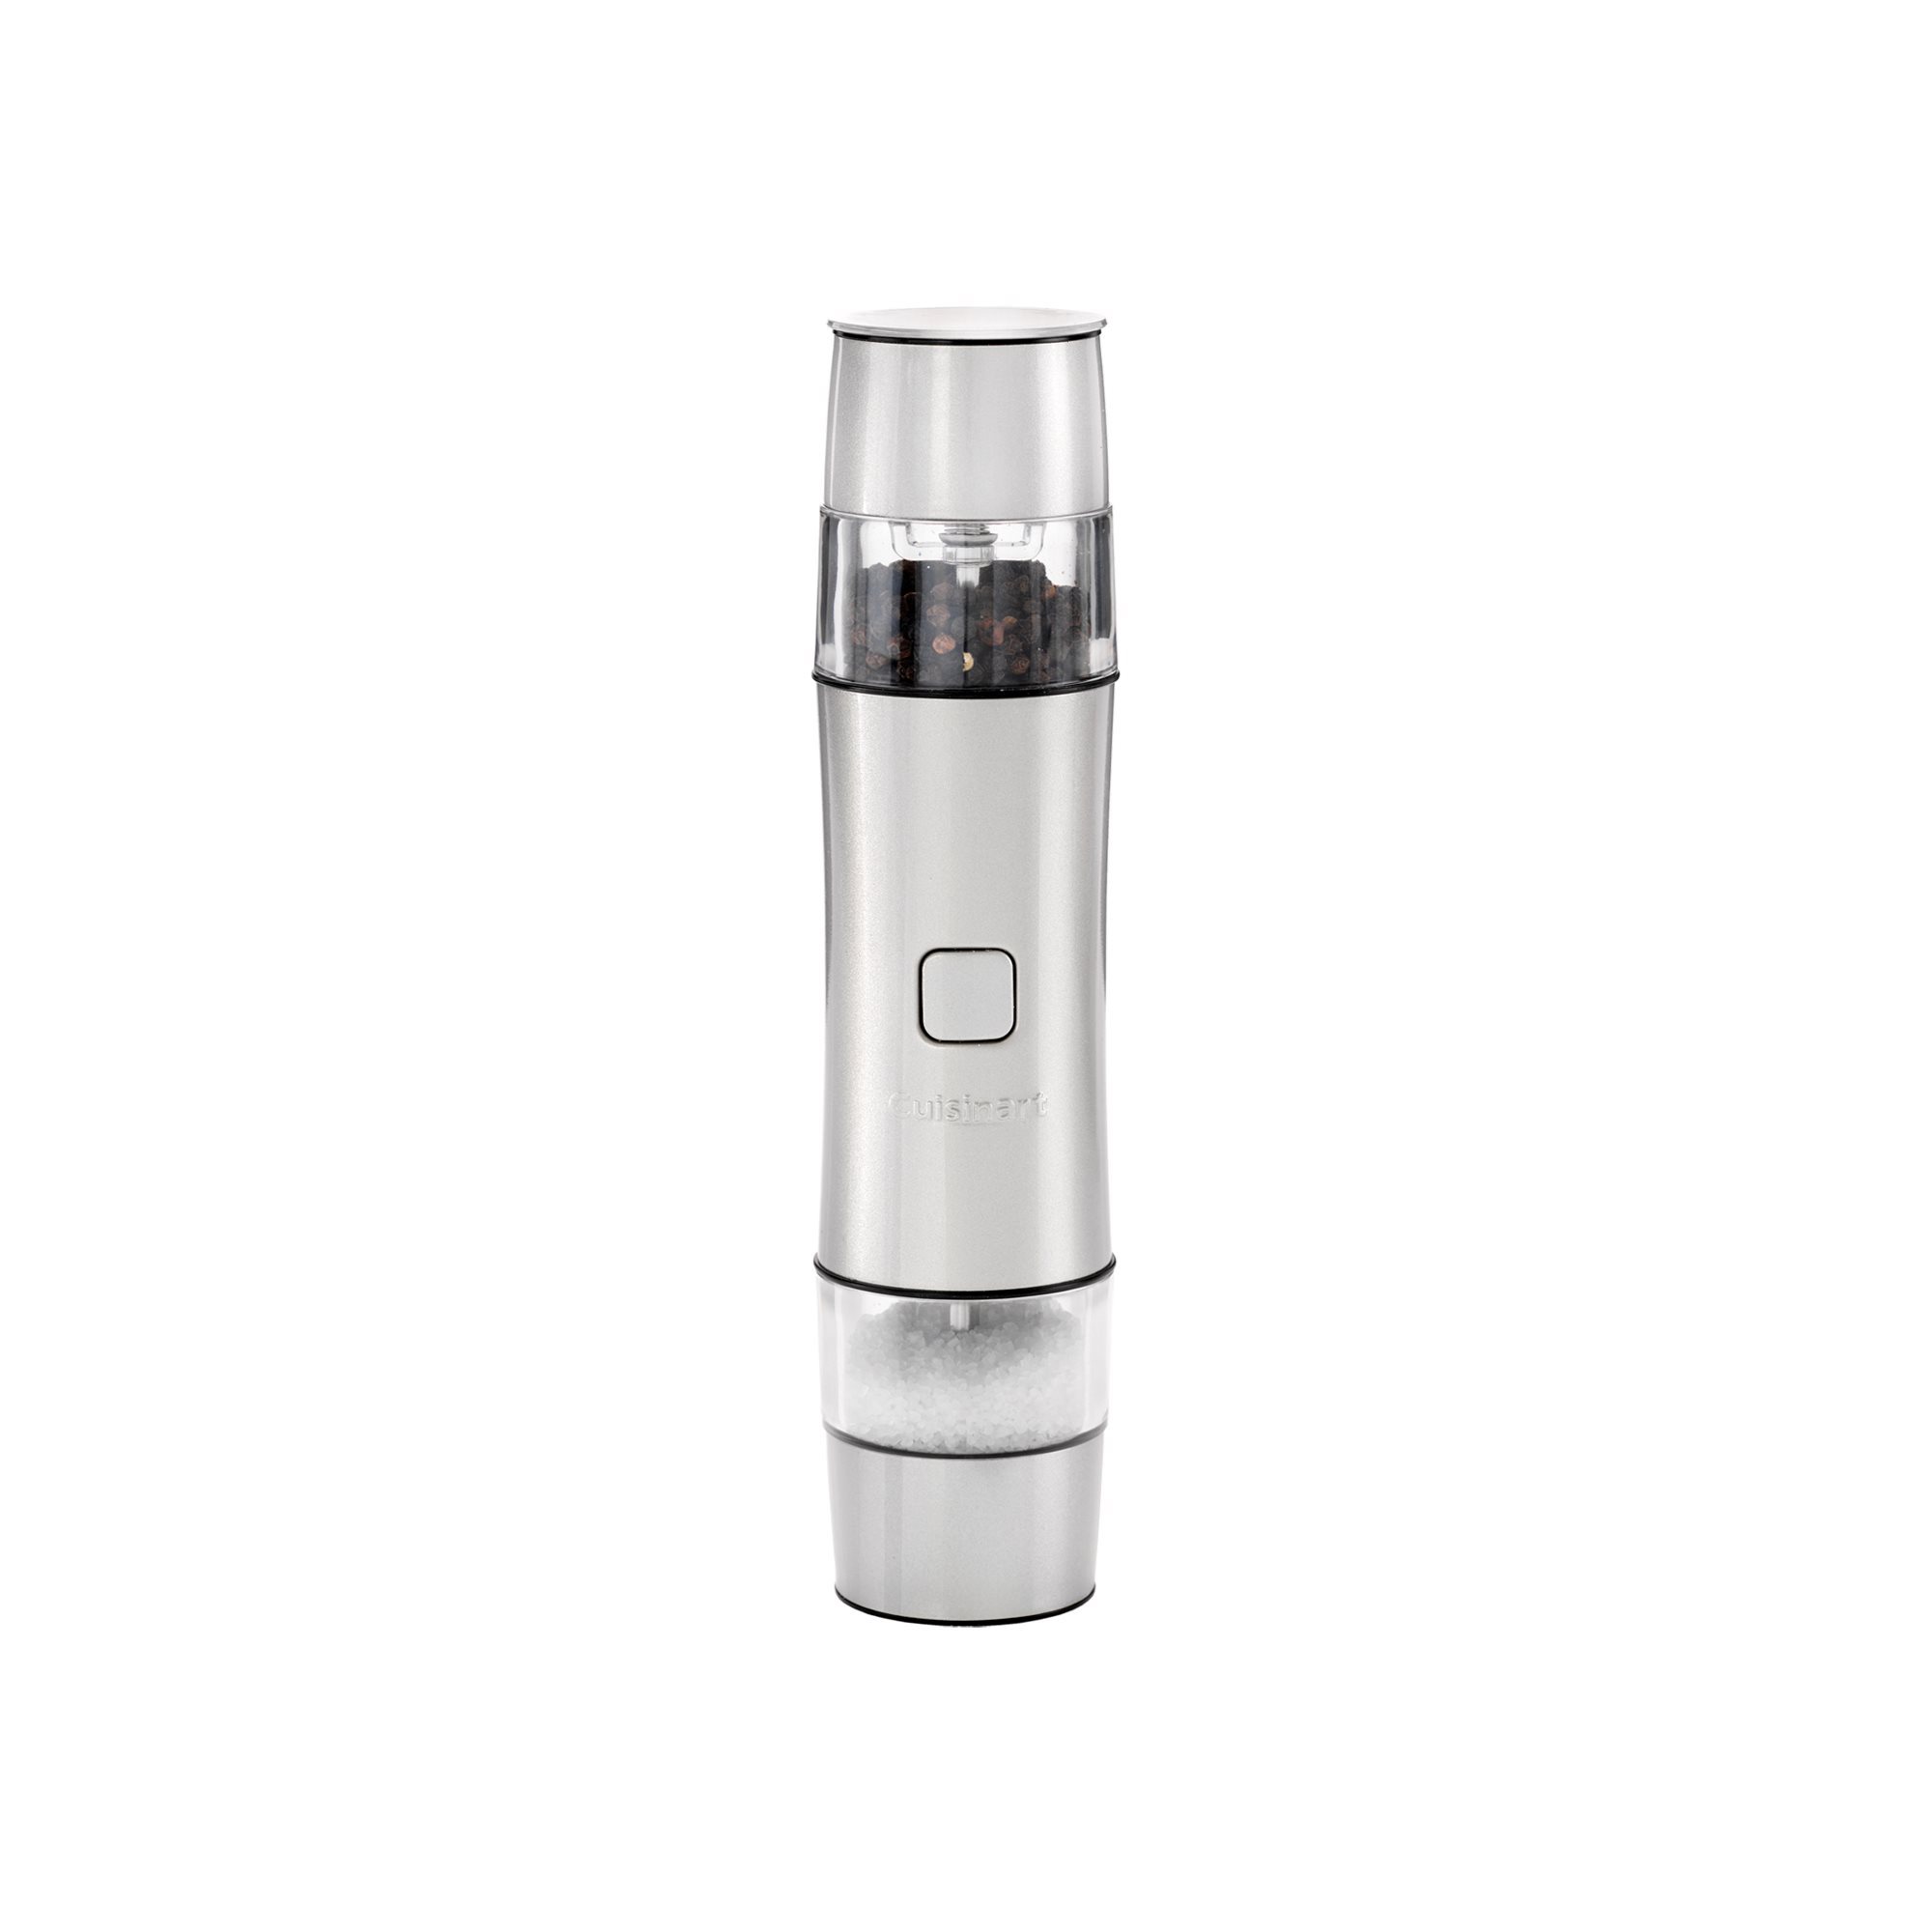 Double electric salt and pepper grinder, Pearl Grey - Cuisinart